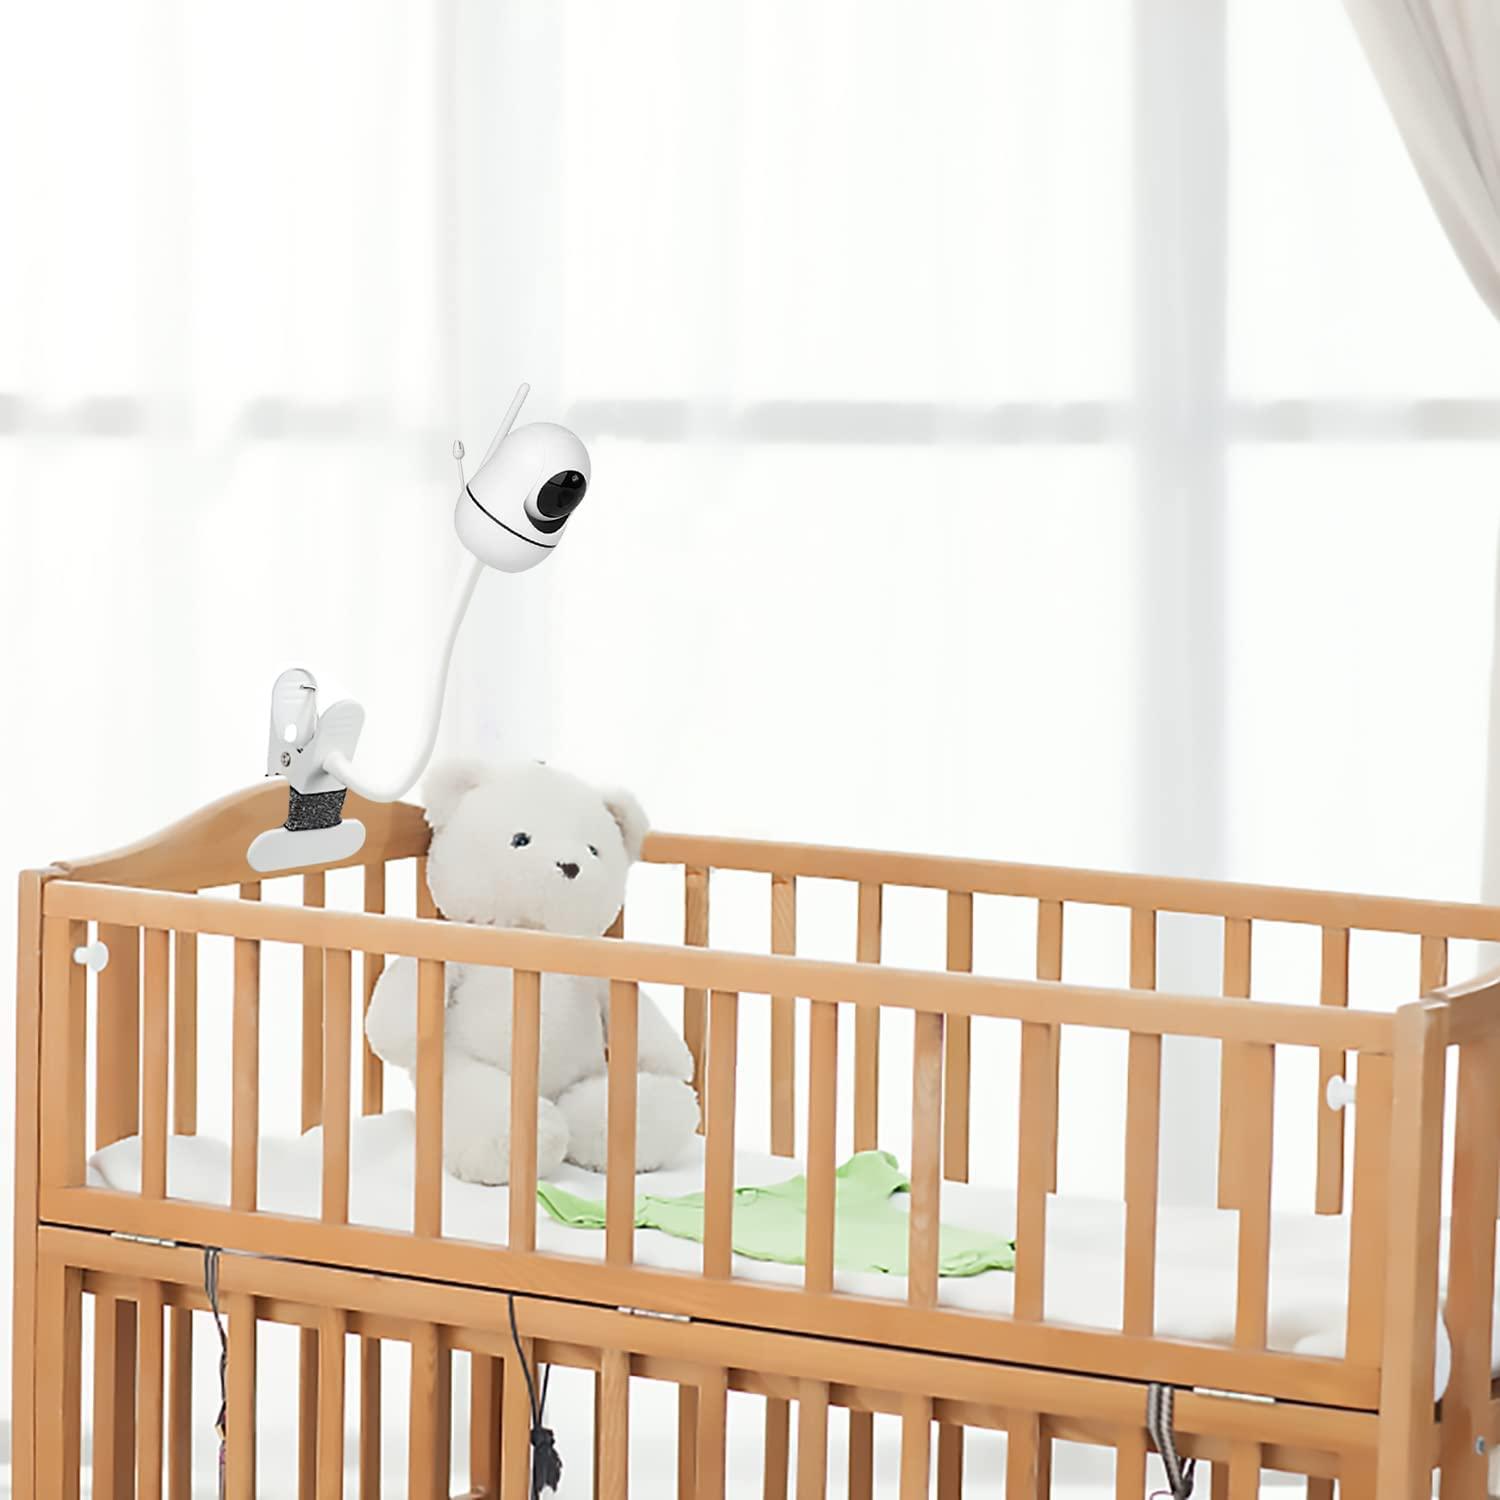 Flexible Twist Mount Bracket for HelloBaby HB24 HB32 Video Baby Monitor  Camera,Attaches to Crib Cot Shelves or Furniture - AliExpress